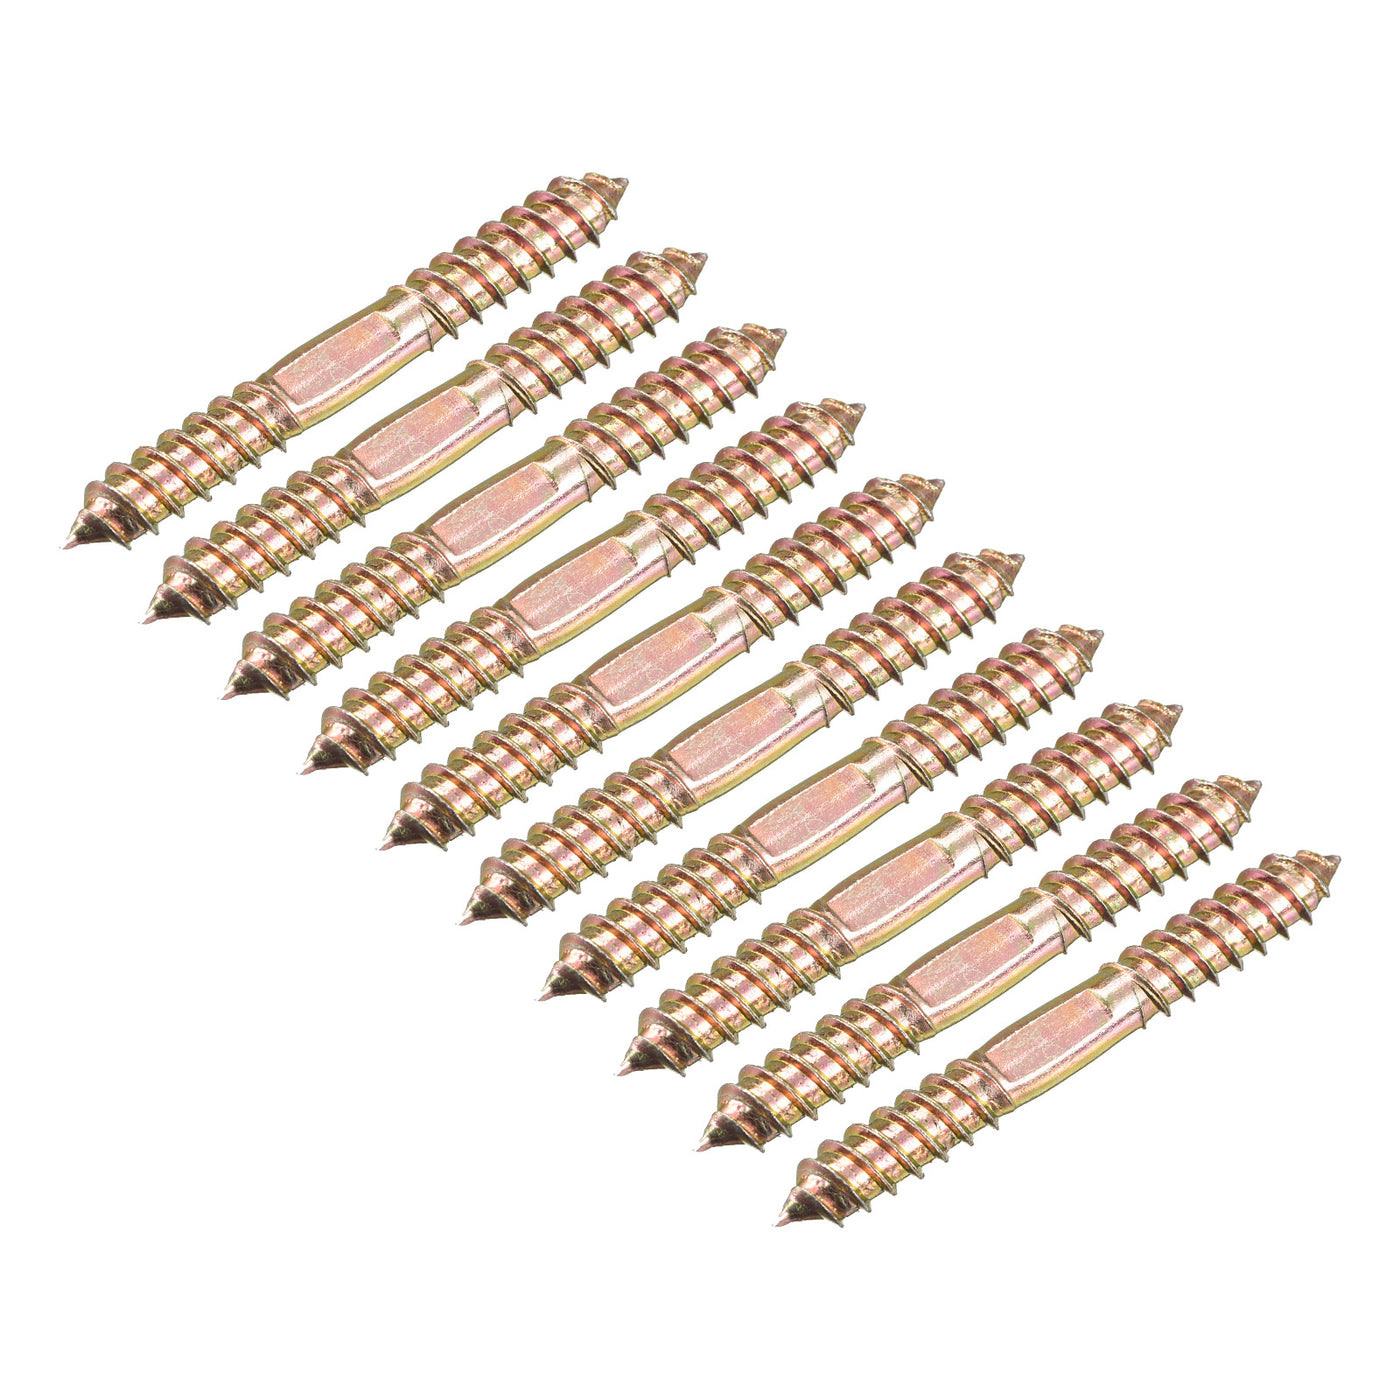 Uxcell Uxcell 10x80mm Hanger Bolts, 48pcs Double Ended Thread Wood to Wood Dowel Screws